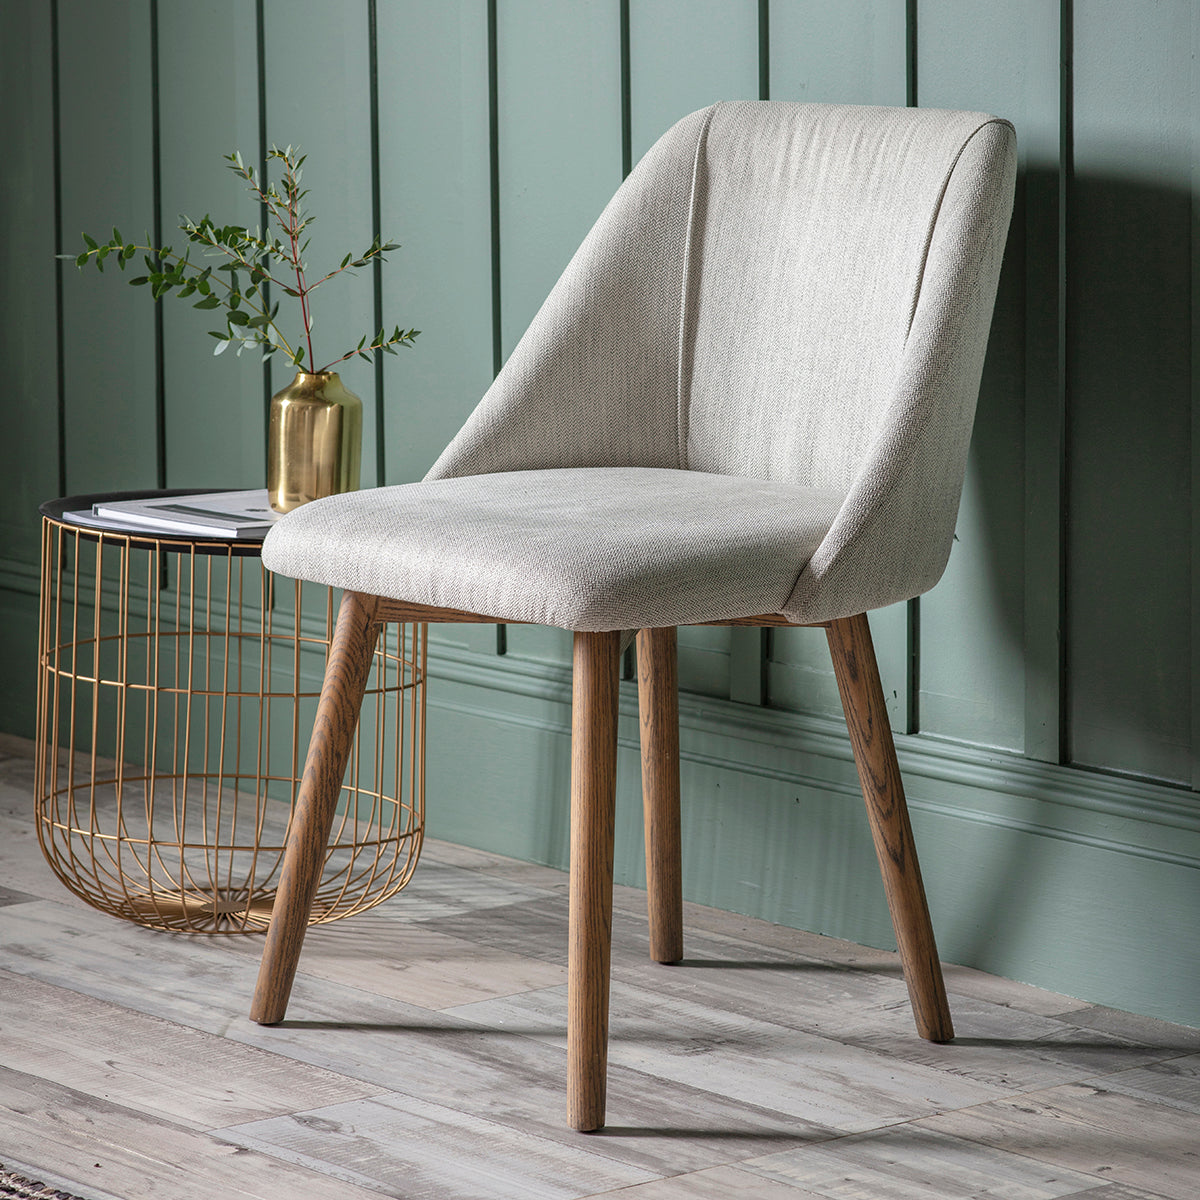 A Hempston Dining Chair Neutral (2pk) 570x610x840mm by Kikiathome.co.uk for interior decor with wooden legs in front of a green wall.